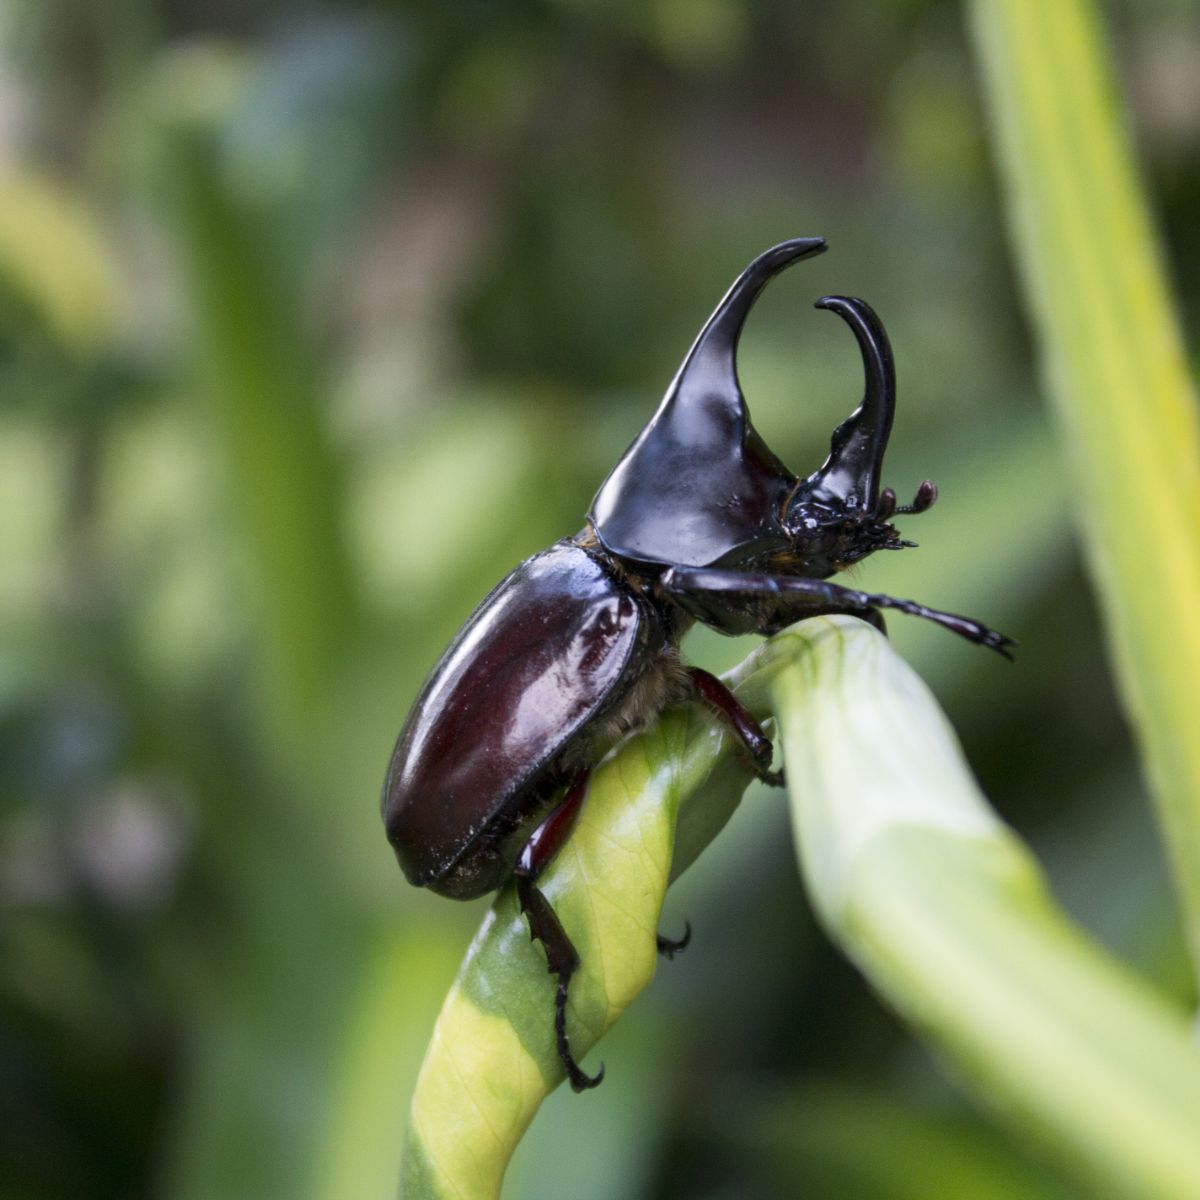 What is the spiritual meaning of the black beetle